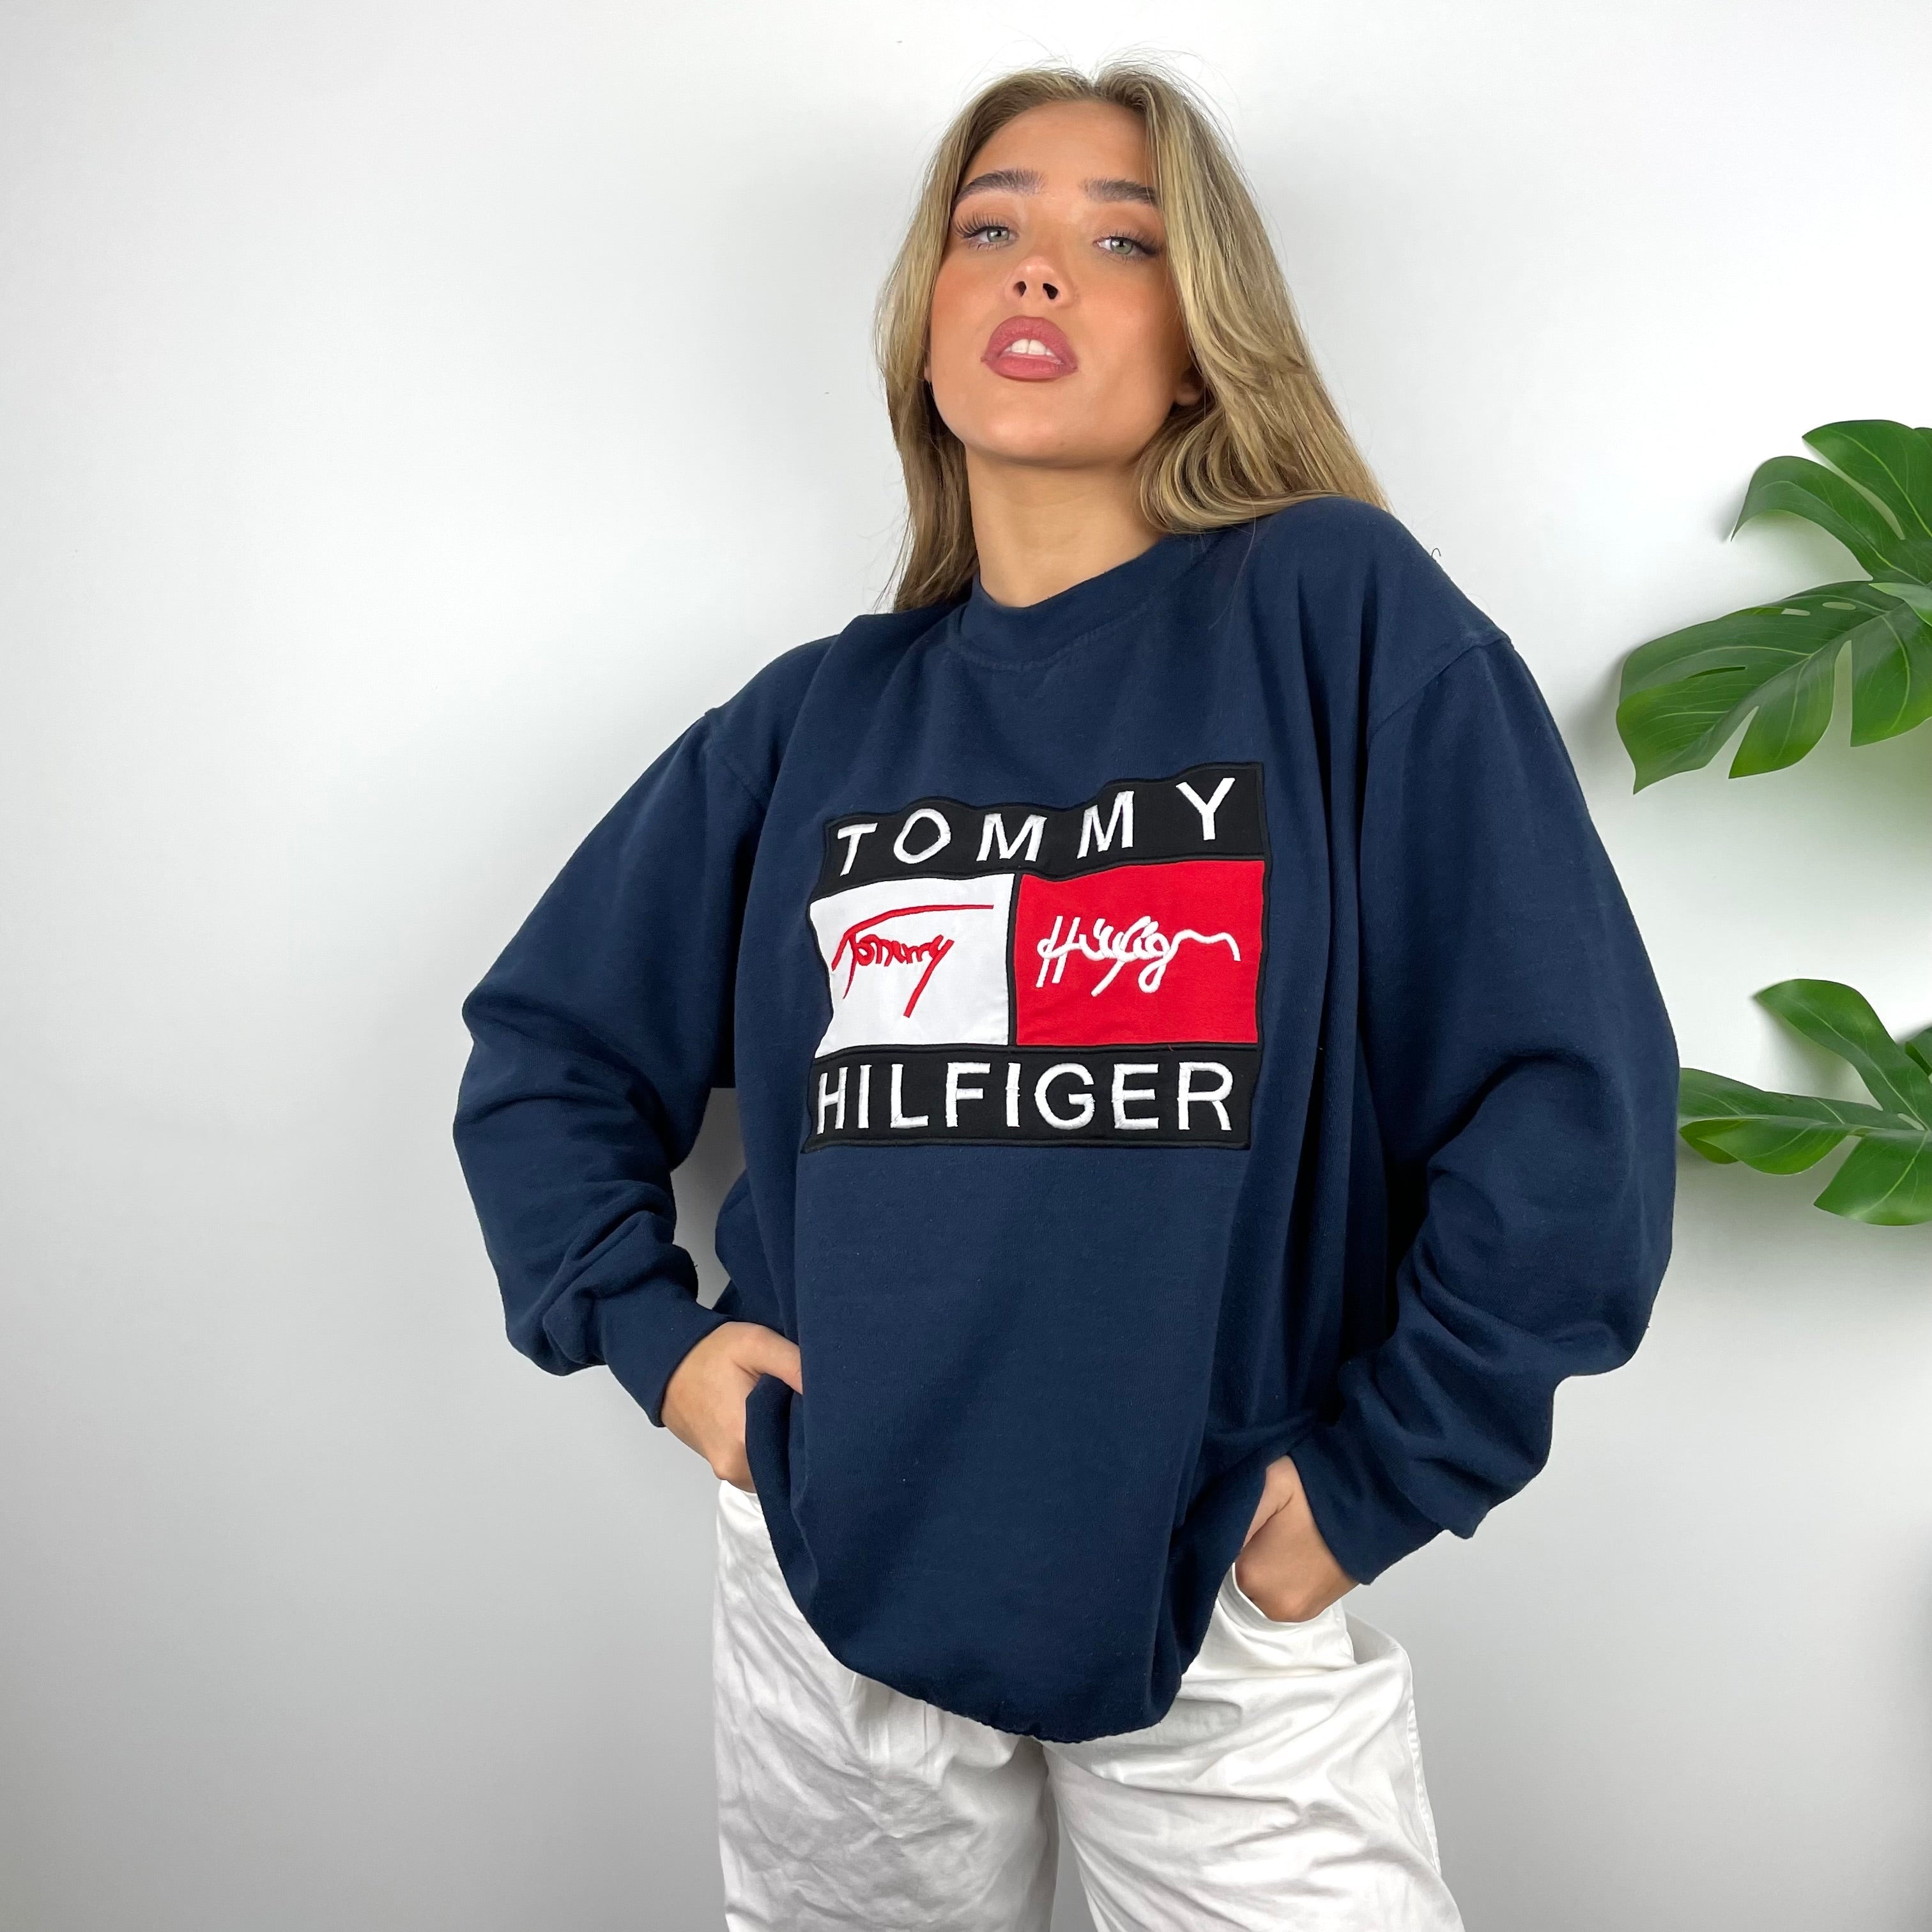 Tommy Hilfiger RARE Navy Embroidered Spell Out Sweatshirt as worn by Annalivia Hynds (XXL)